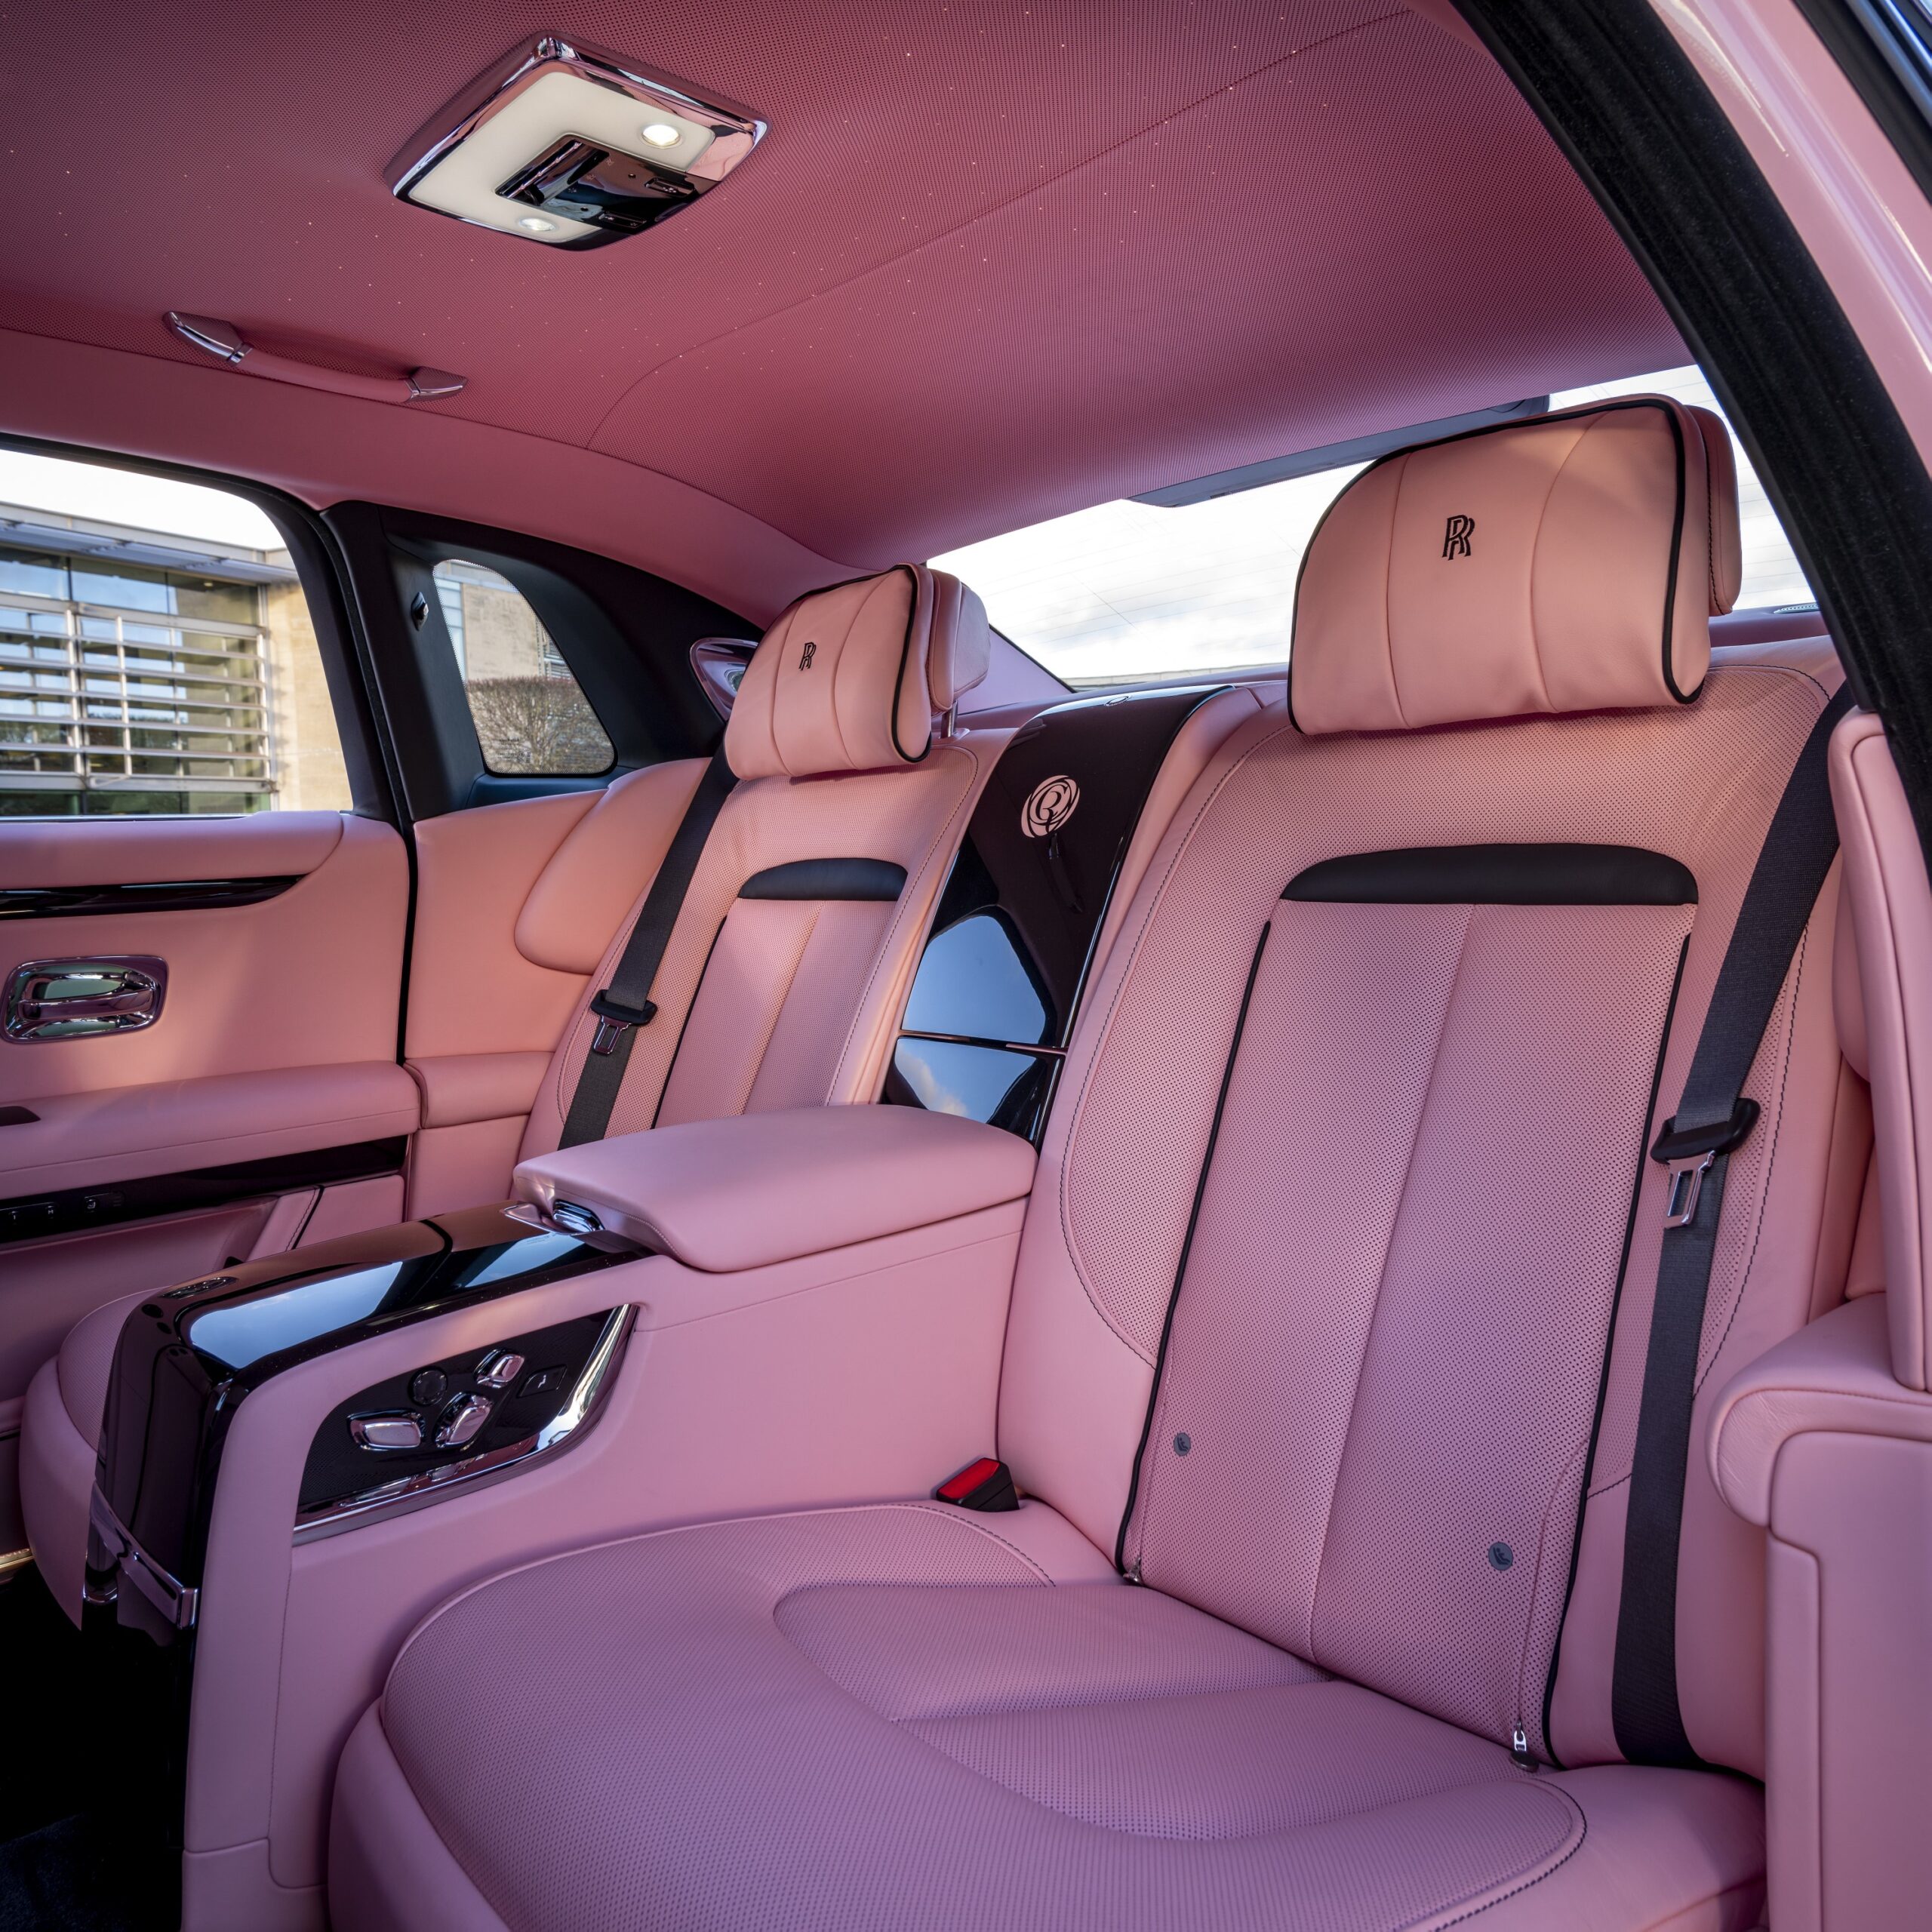 Rolls-Royce champagne rose just in time for mother's day via 360 MAGAZINE. 